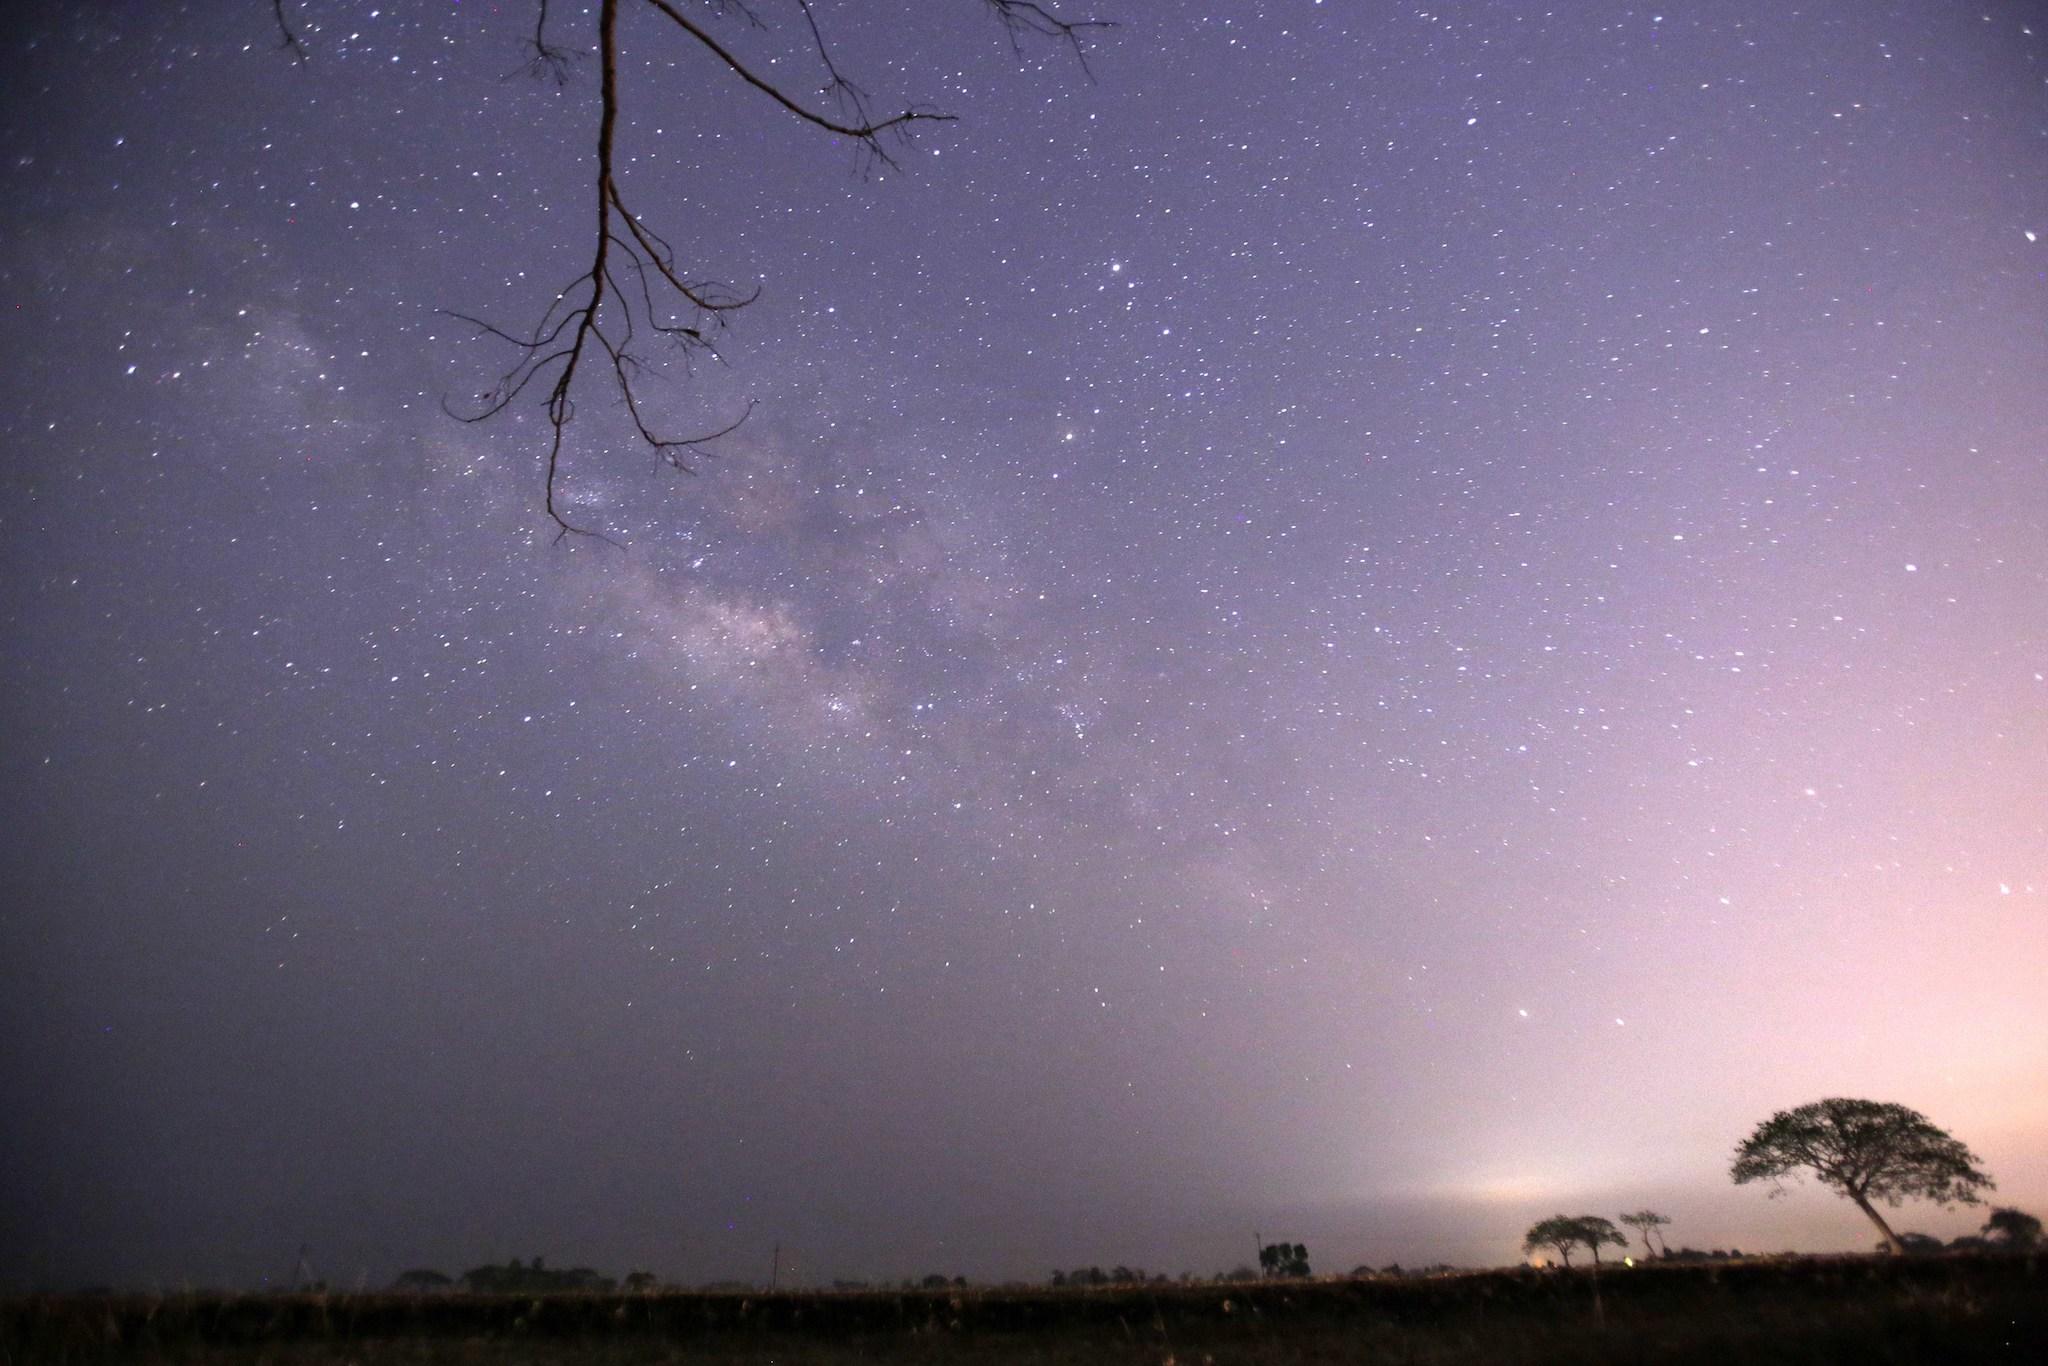 This long-exposure photograph taken on April 23, 2015 on Earth Day shows Lyrids meteors shower passing near the Milky Way in the clear night sky of Thanlyin, nearly 14miles away from Yangon